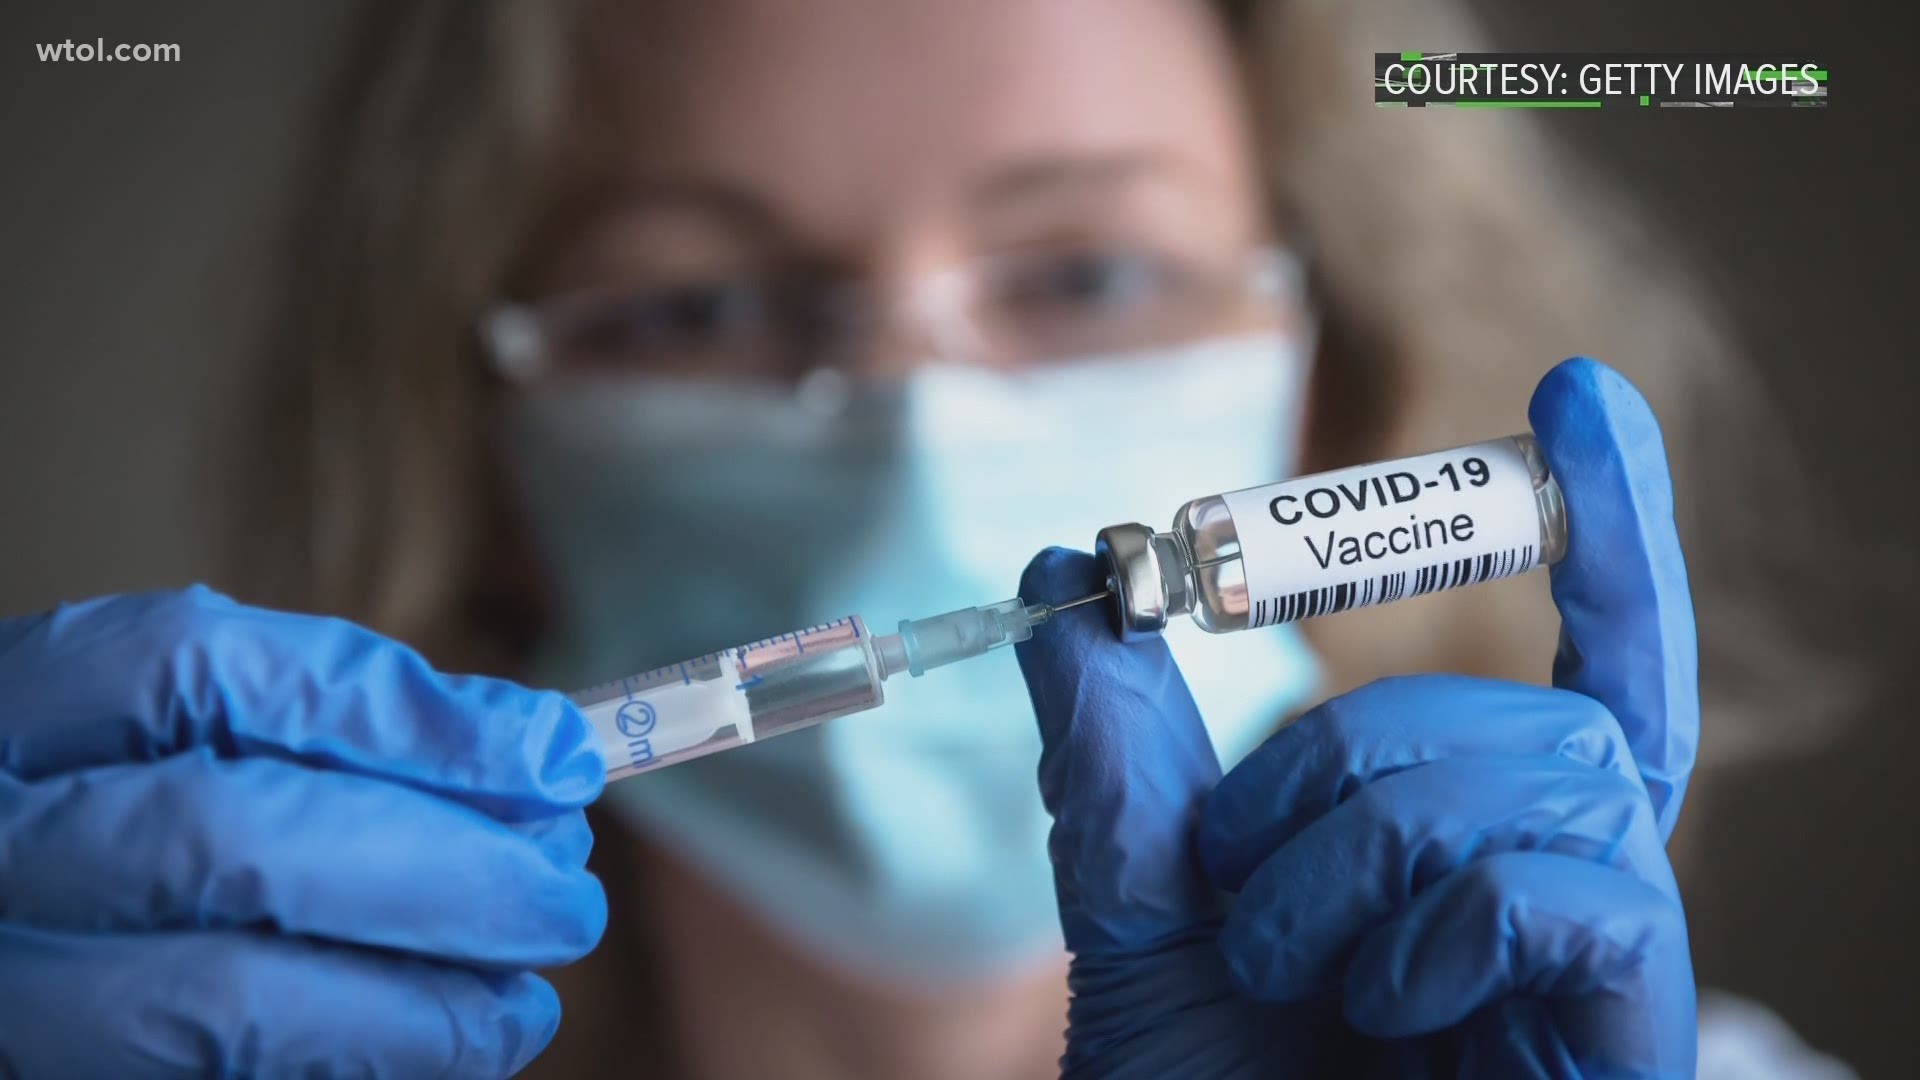 There are claims on social media about the COVID-19 vaccines' effects on fertility and susceptibility to other diseases. Our VERIFY team checked with the experts.